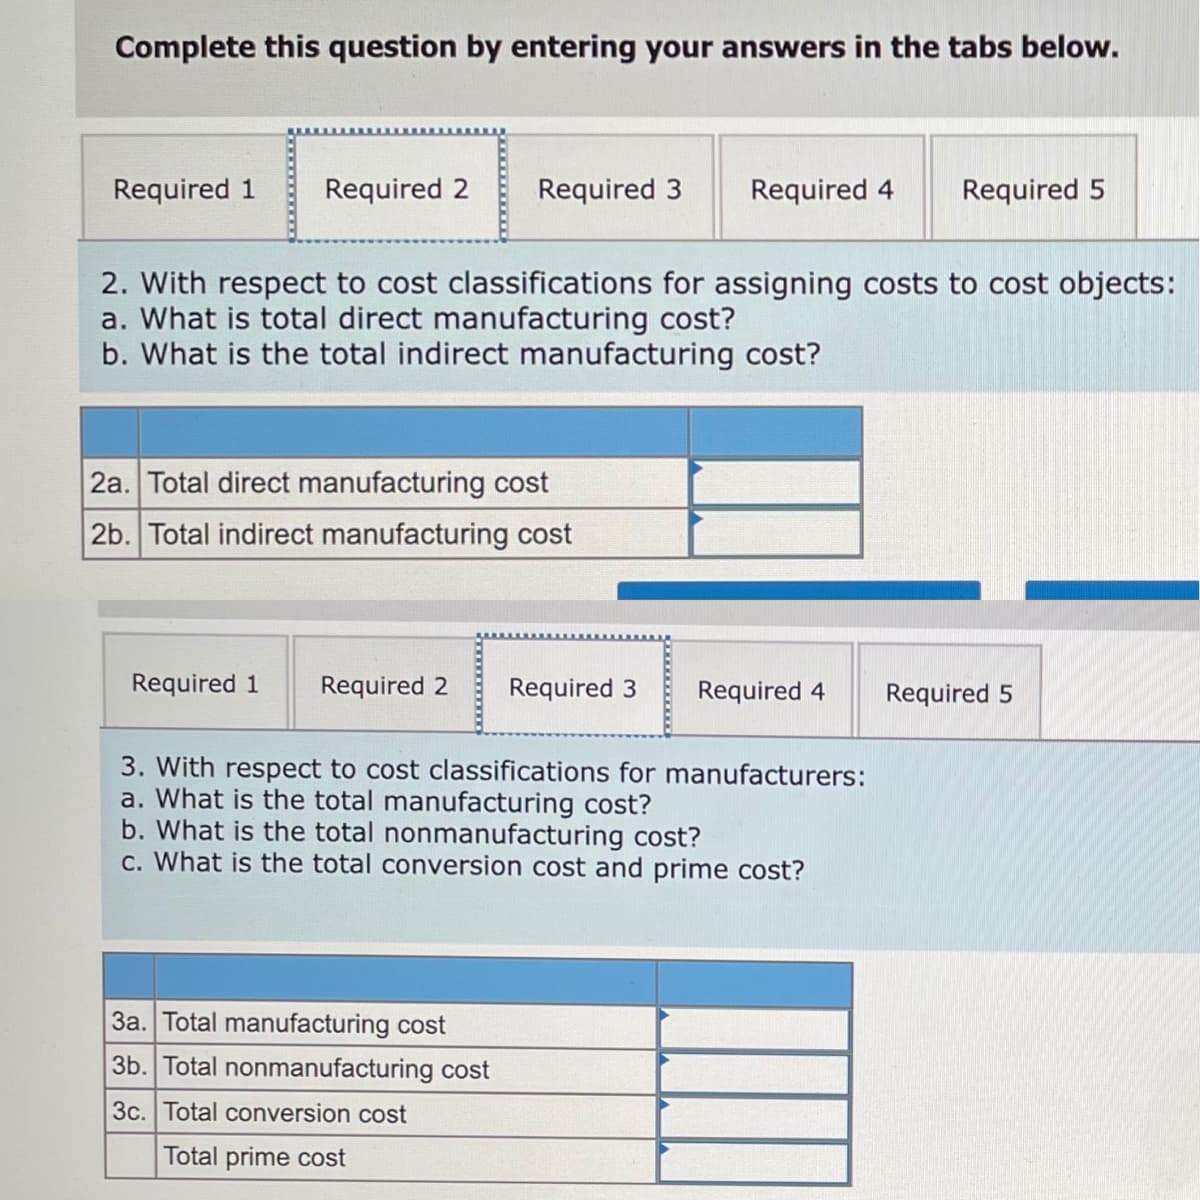 Complete this question by entering your answers in the tabs below.
Required 1
Required 2
Required 3
Required 4
Required 5
2. With respect to cost classifications for assigning costs to cost objects:
a. What is total direct manufacturing cost?
b. What is the total indirect manufacturing cost?
2a. Total direct manufacturing cost
2b. Total indirect manufacturing cost
Required 1
Required 2
Required 3
Required 4
Required 5
3. With respect to cost classifications for manufacturers:
a. What is the total manufacturing cost?
b. What is the total nonmanufacturing cost?
c. What is the total conversion cost and prime cost?
3a. Total manufacturing cost
3b. Total nonmanufacturing cost
3c. Total conversion cost
Total prime cost
